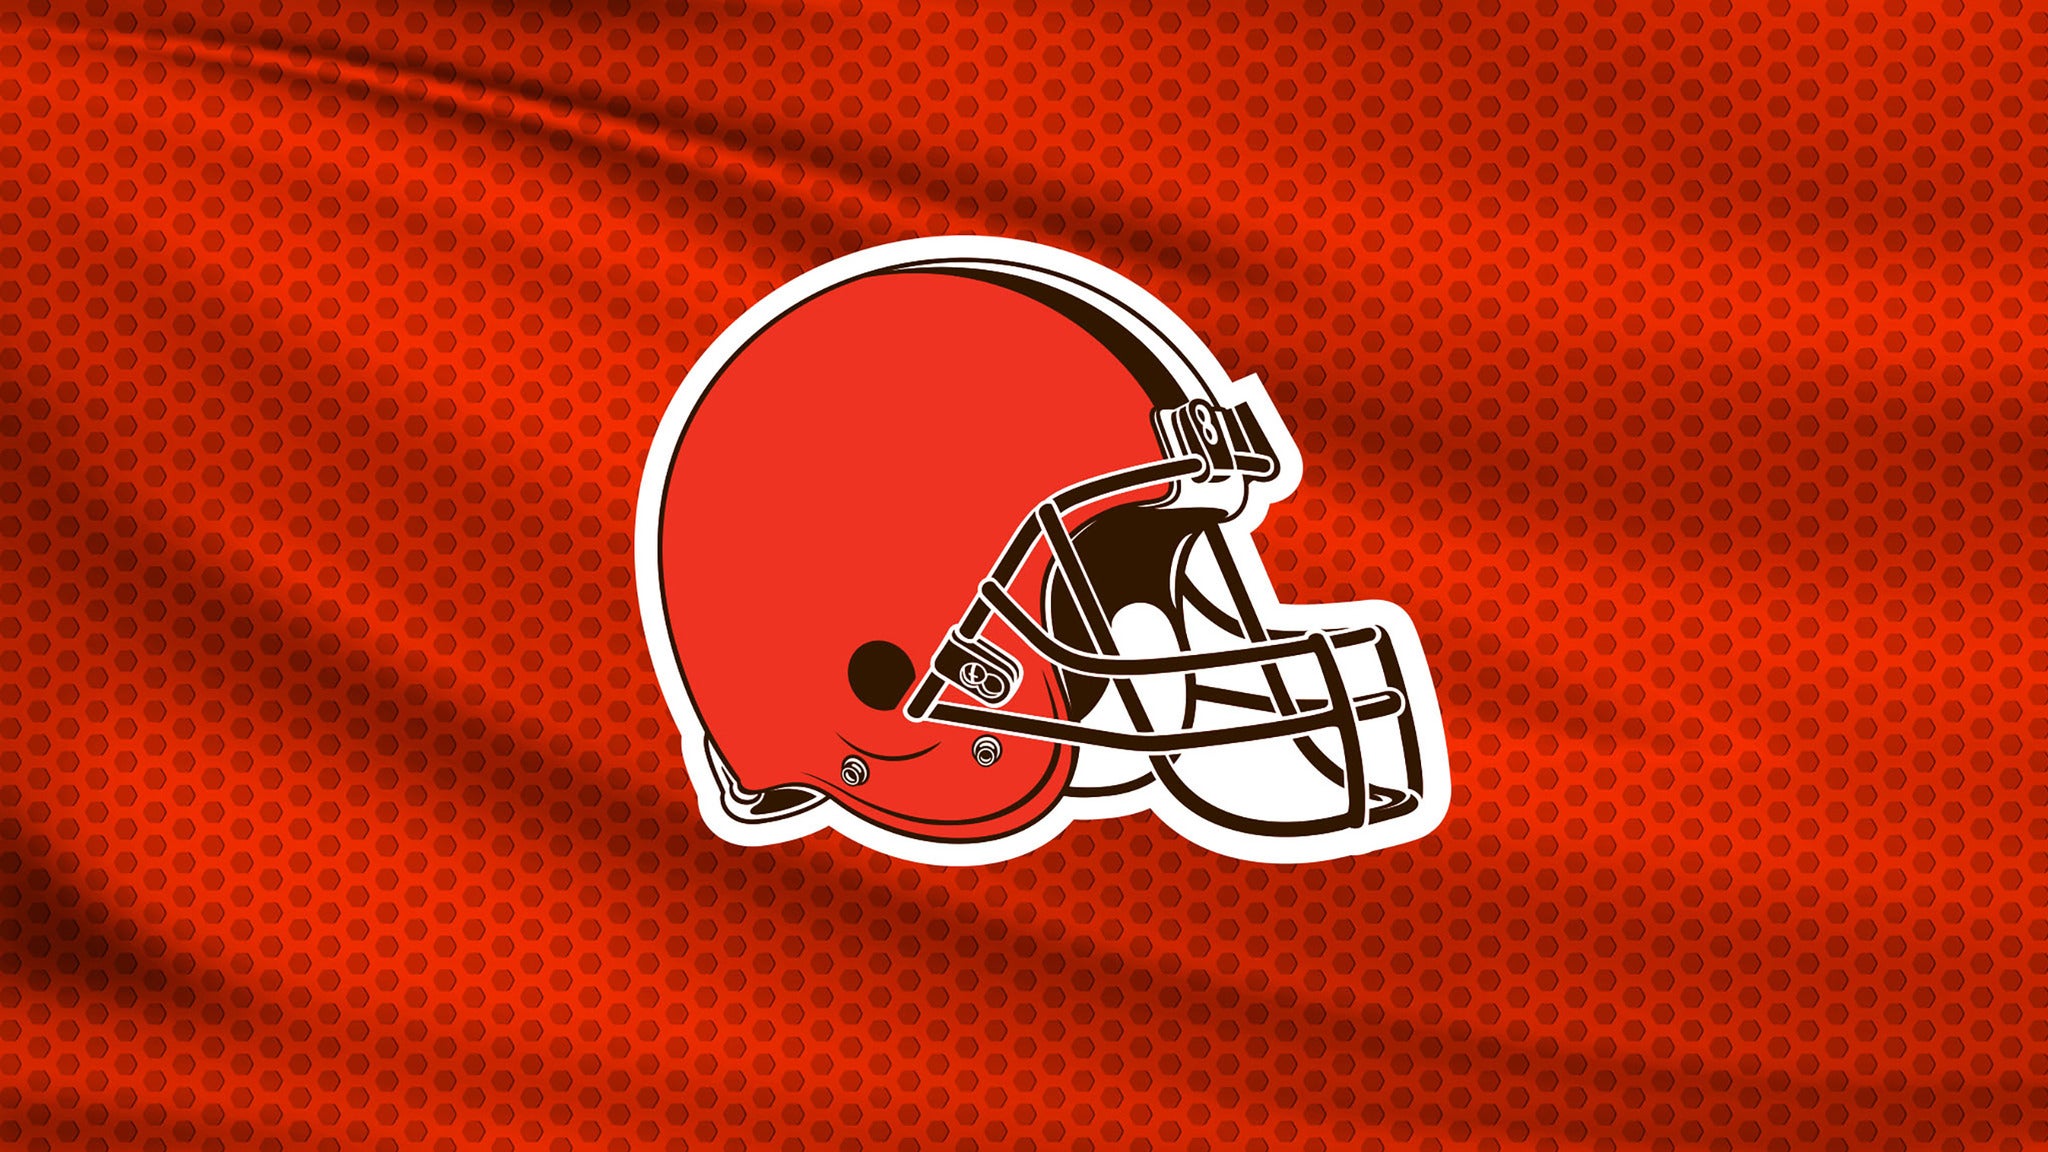 cleveland browns home game schedule 2022